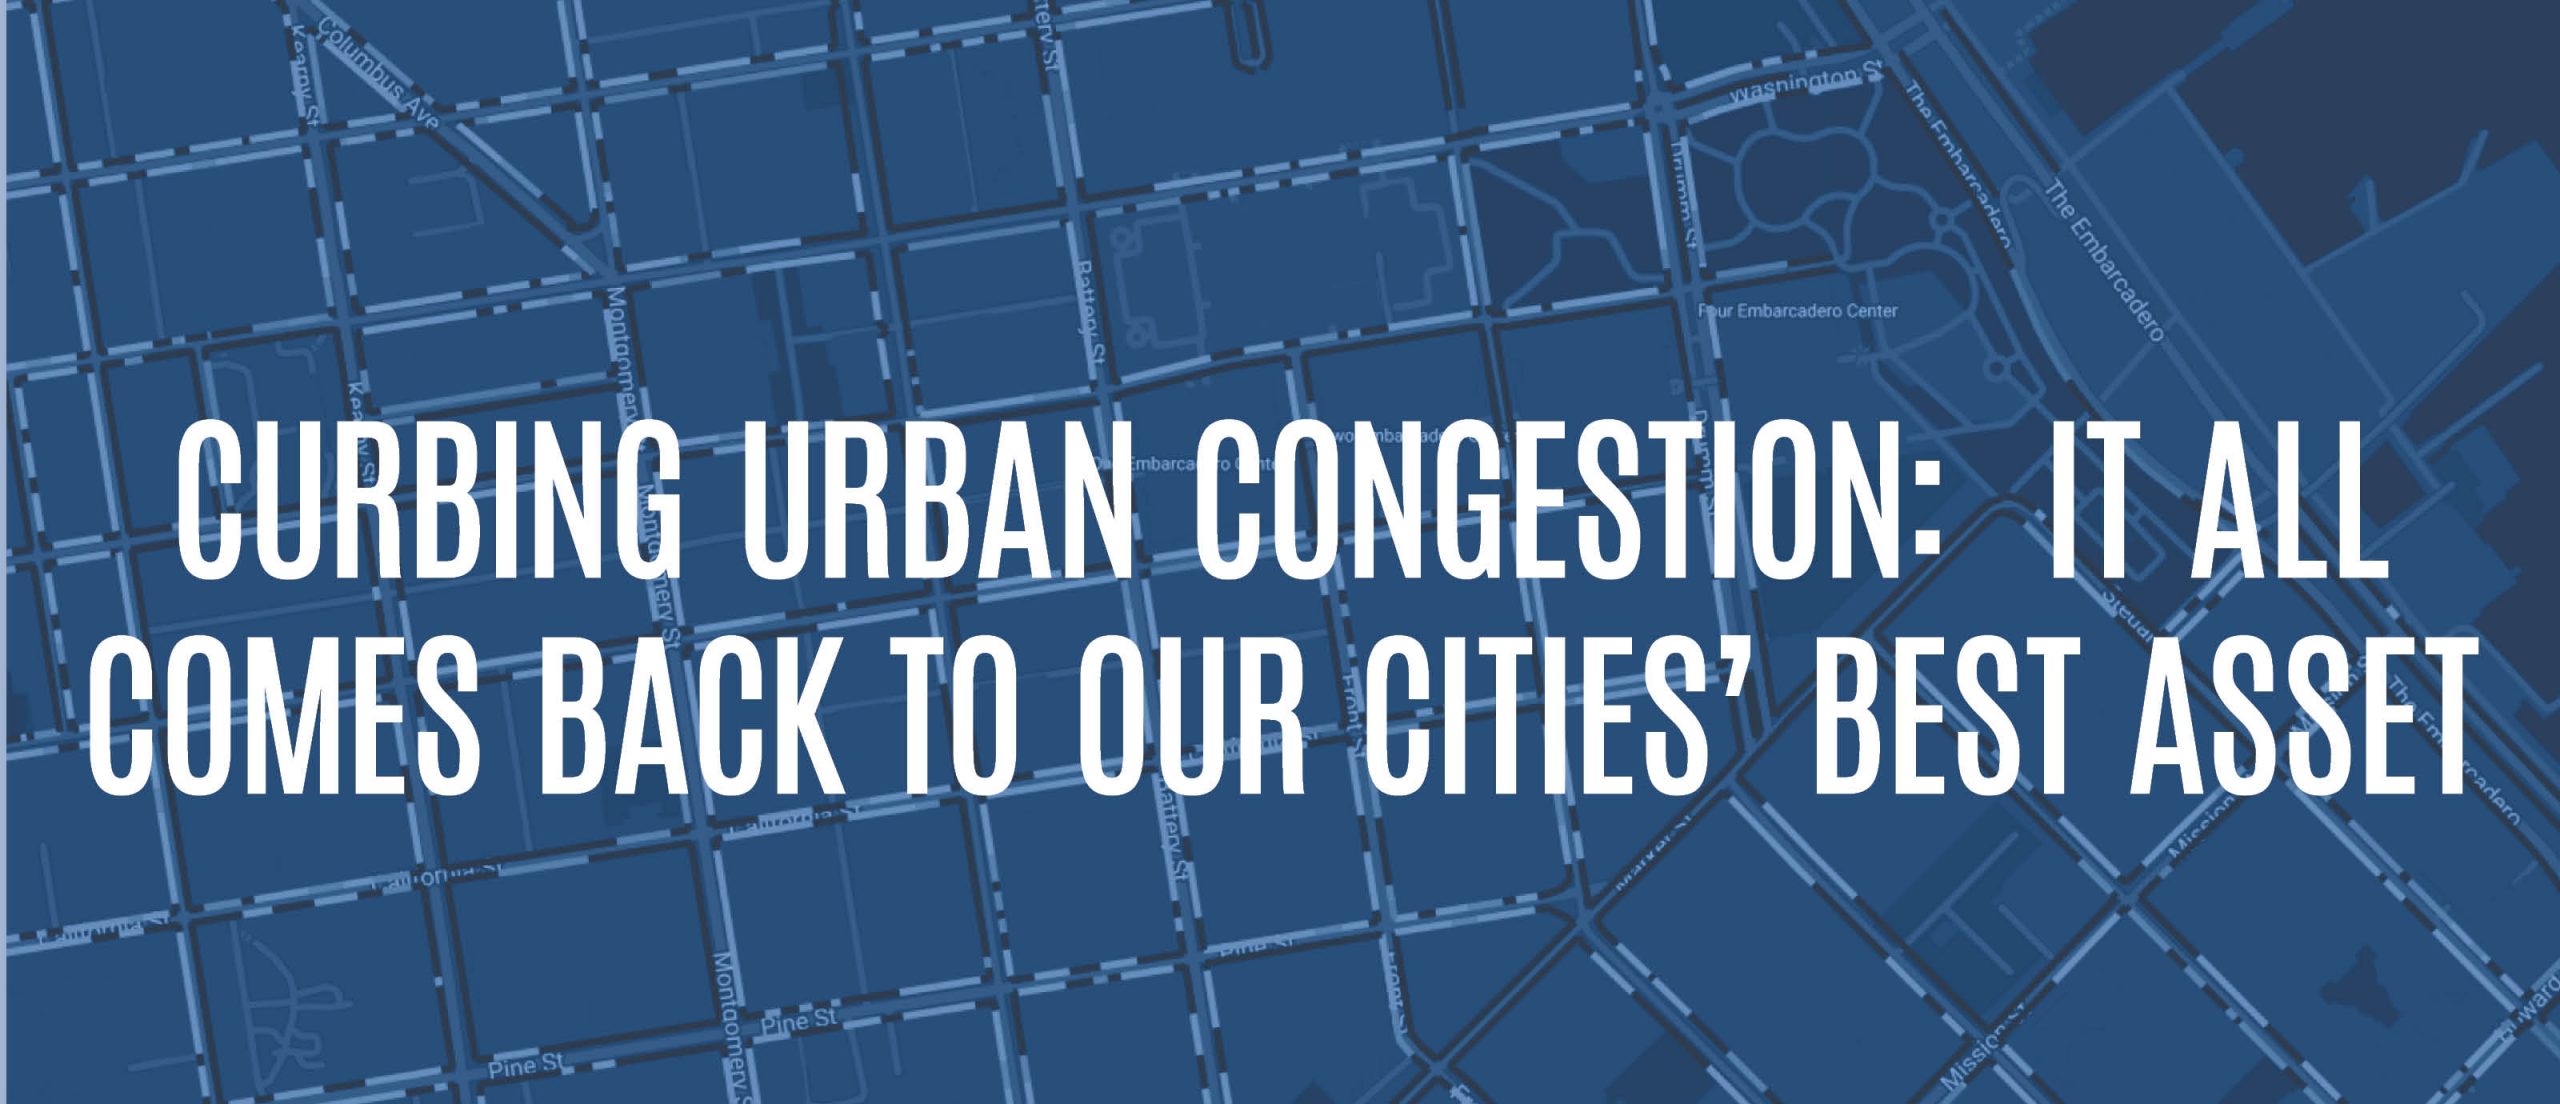 Blog Title - Curbing Urban Congestion: It all comes back to our cities' best asset